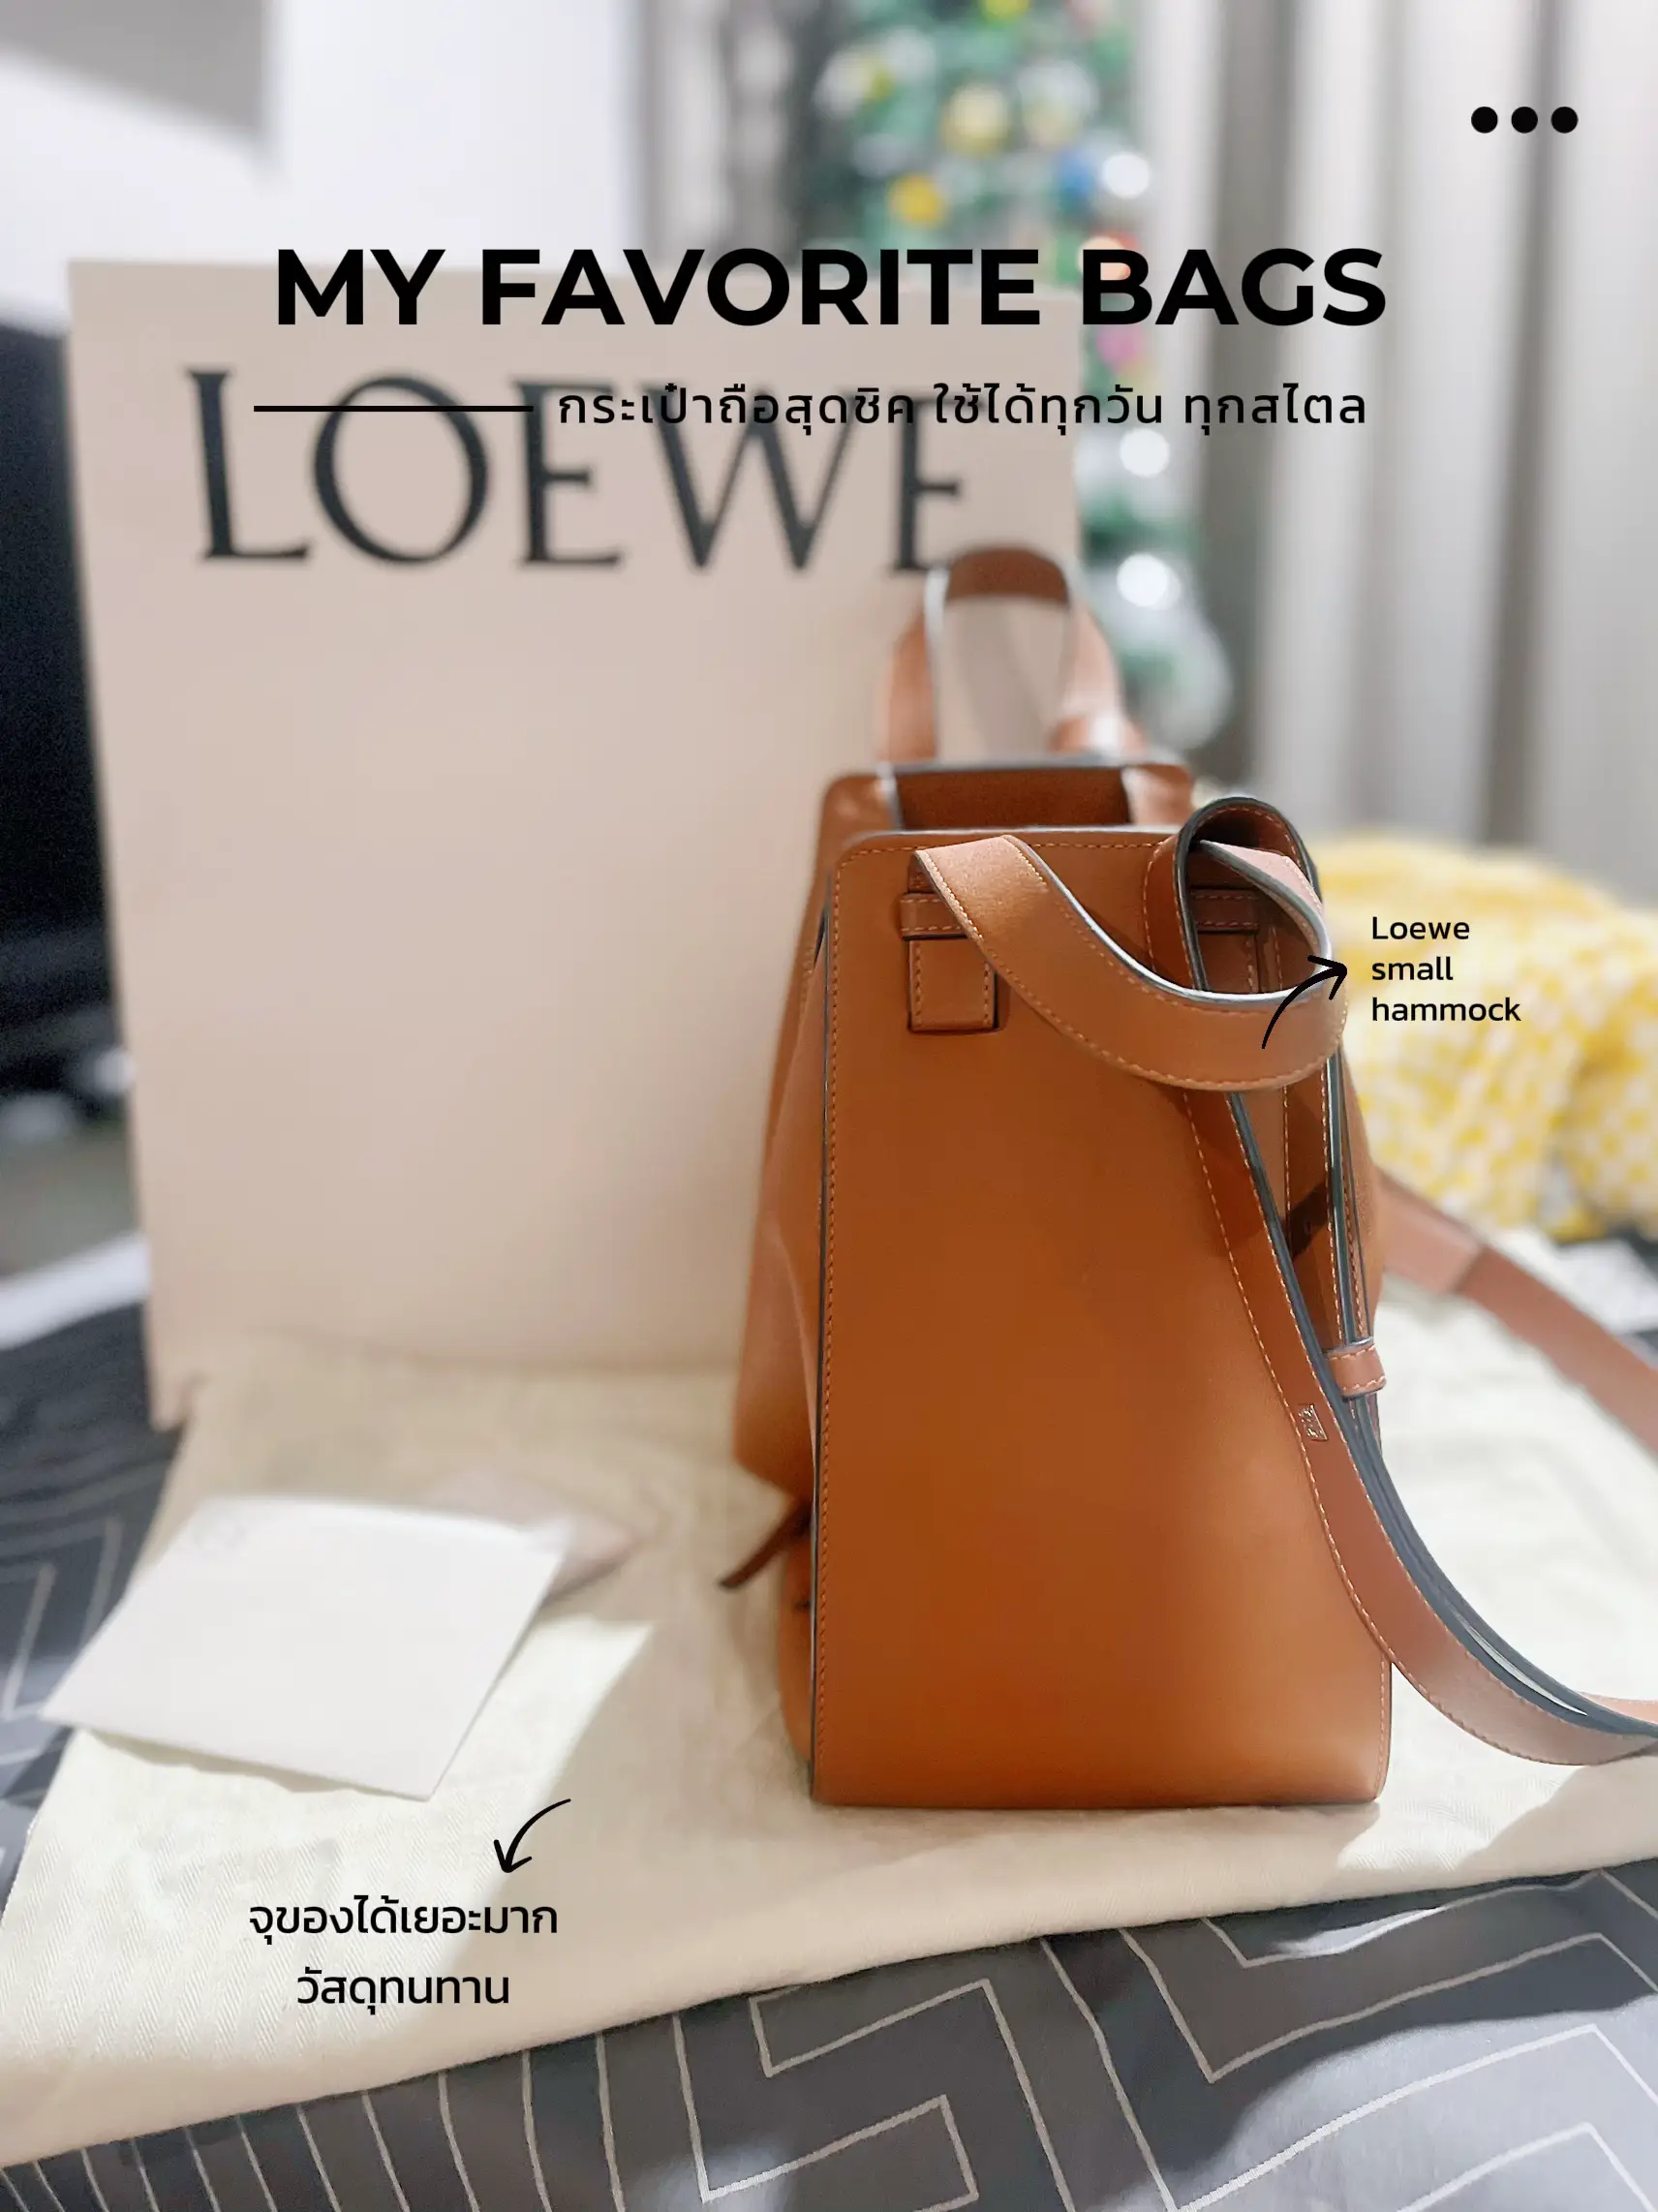 Loewe Puzzle Bag Size Comparison (and Dupes!)